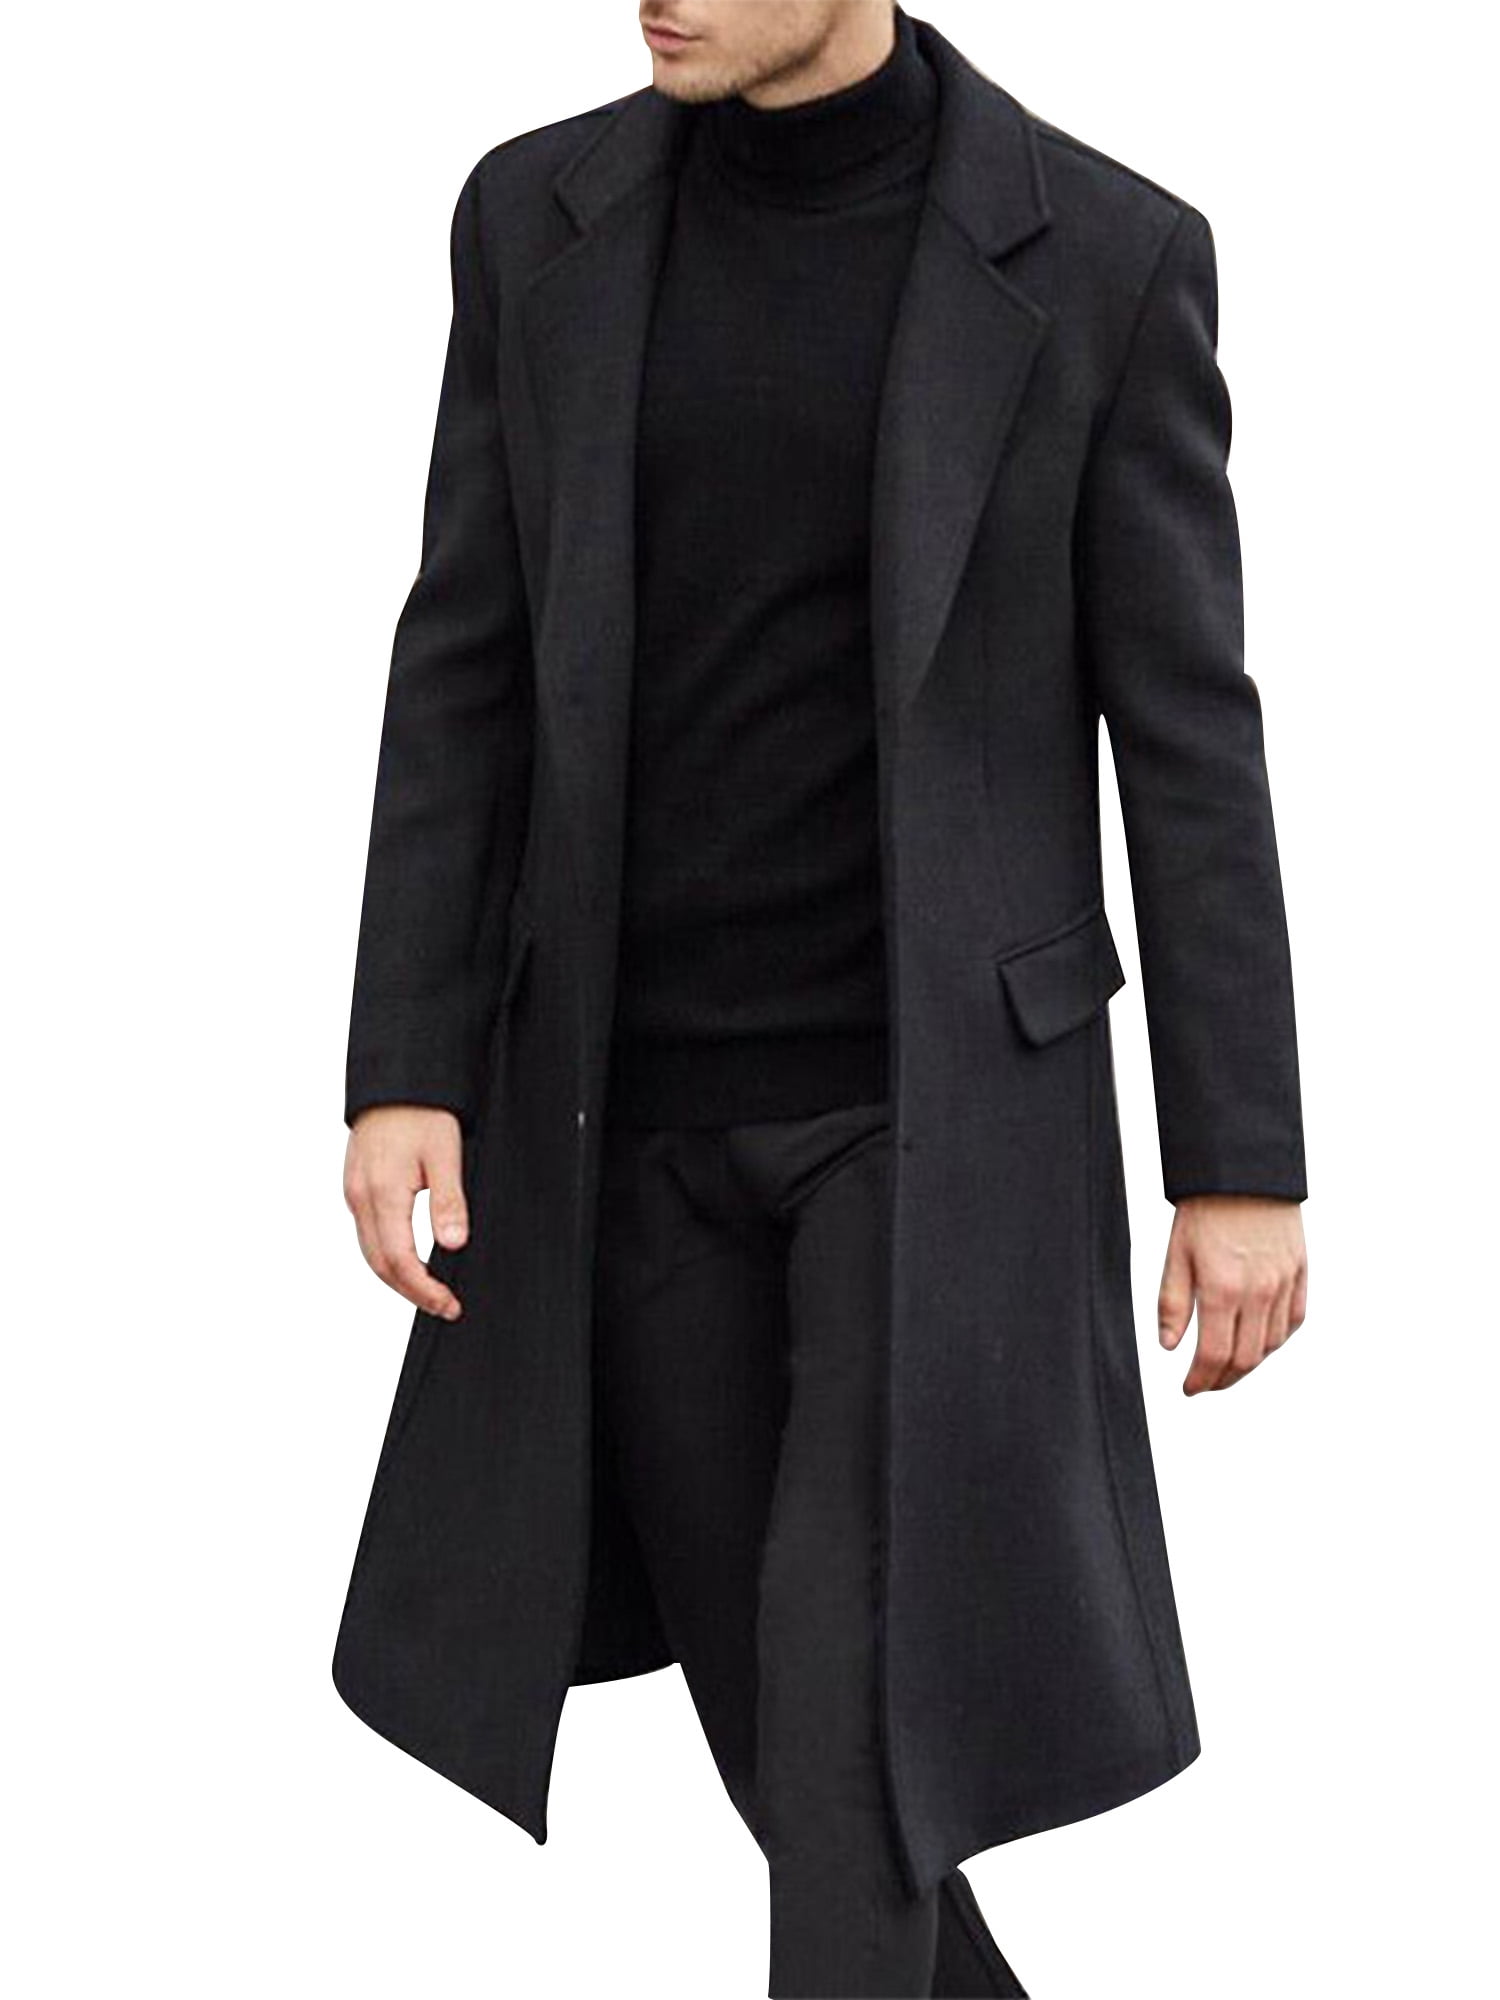 Mens Wool Blend Double Breasted Long Outwear Trench Coat Military Jacket Outwear